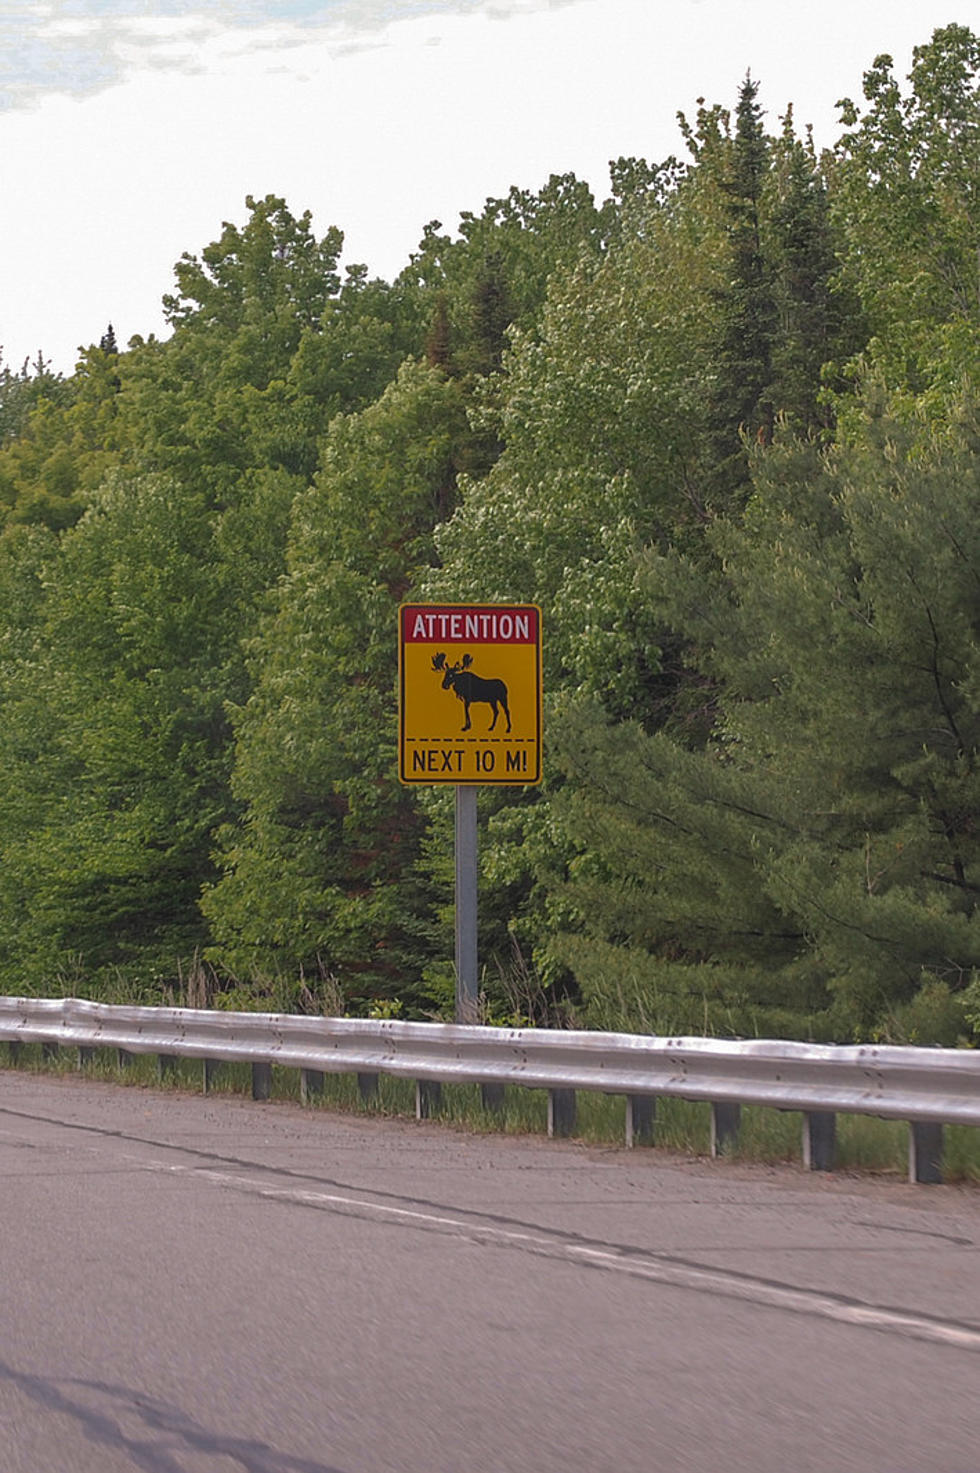 Video: A Moose Calf Caused a Traffic Jam on a Busy Highway in Massachusetts